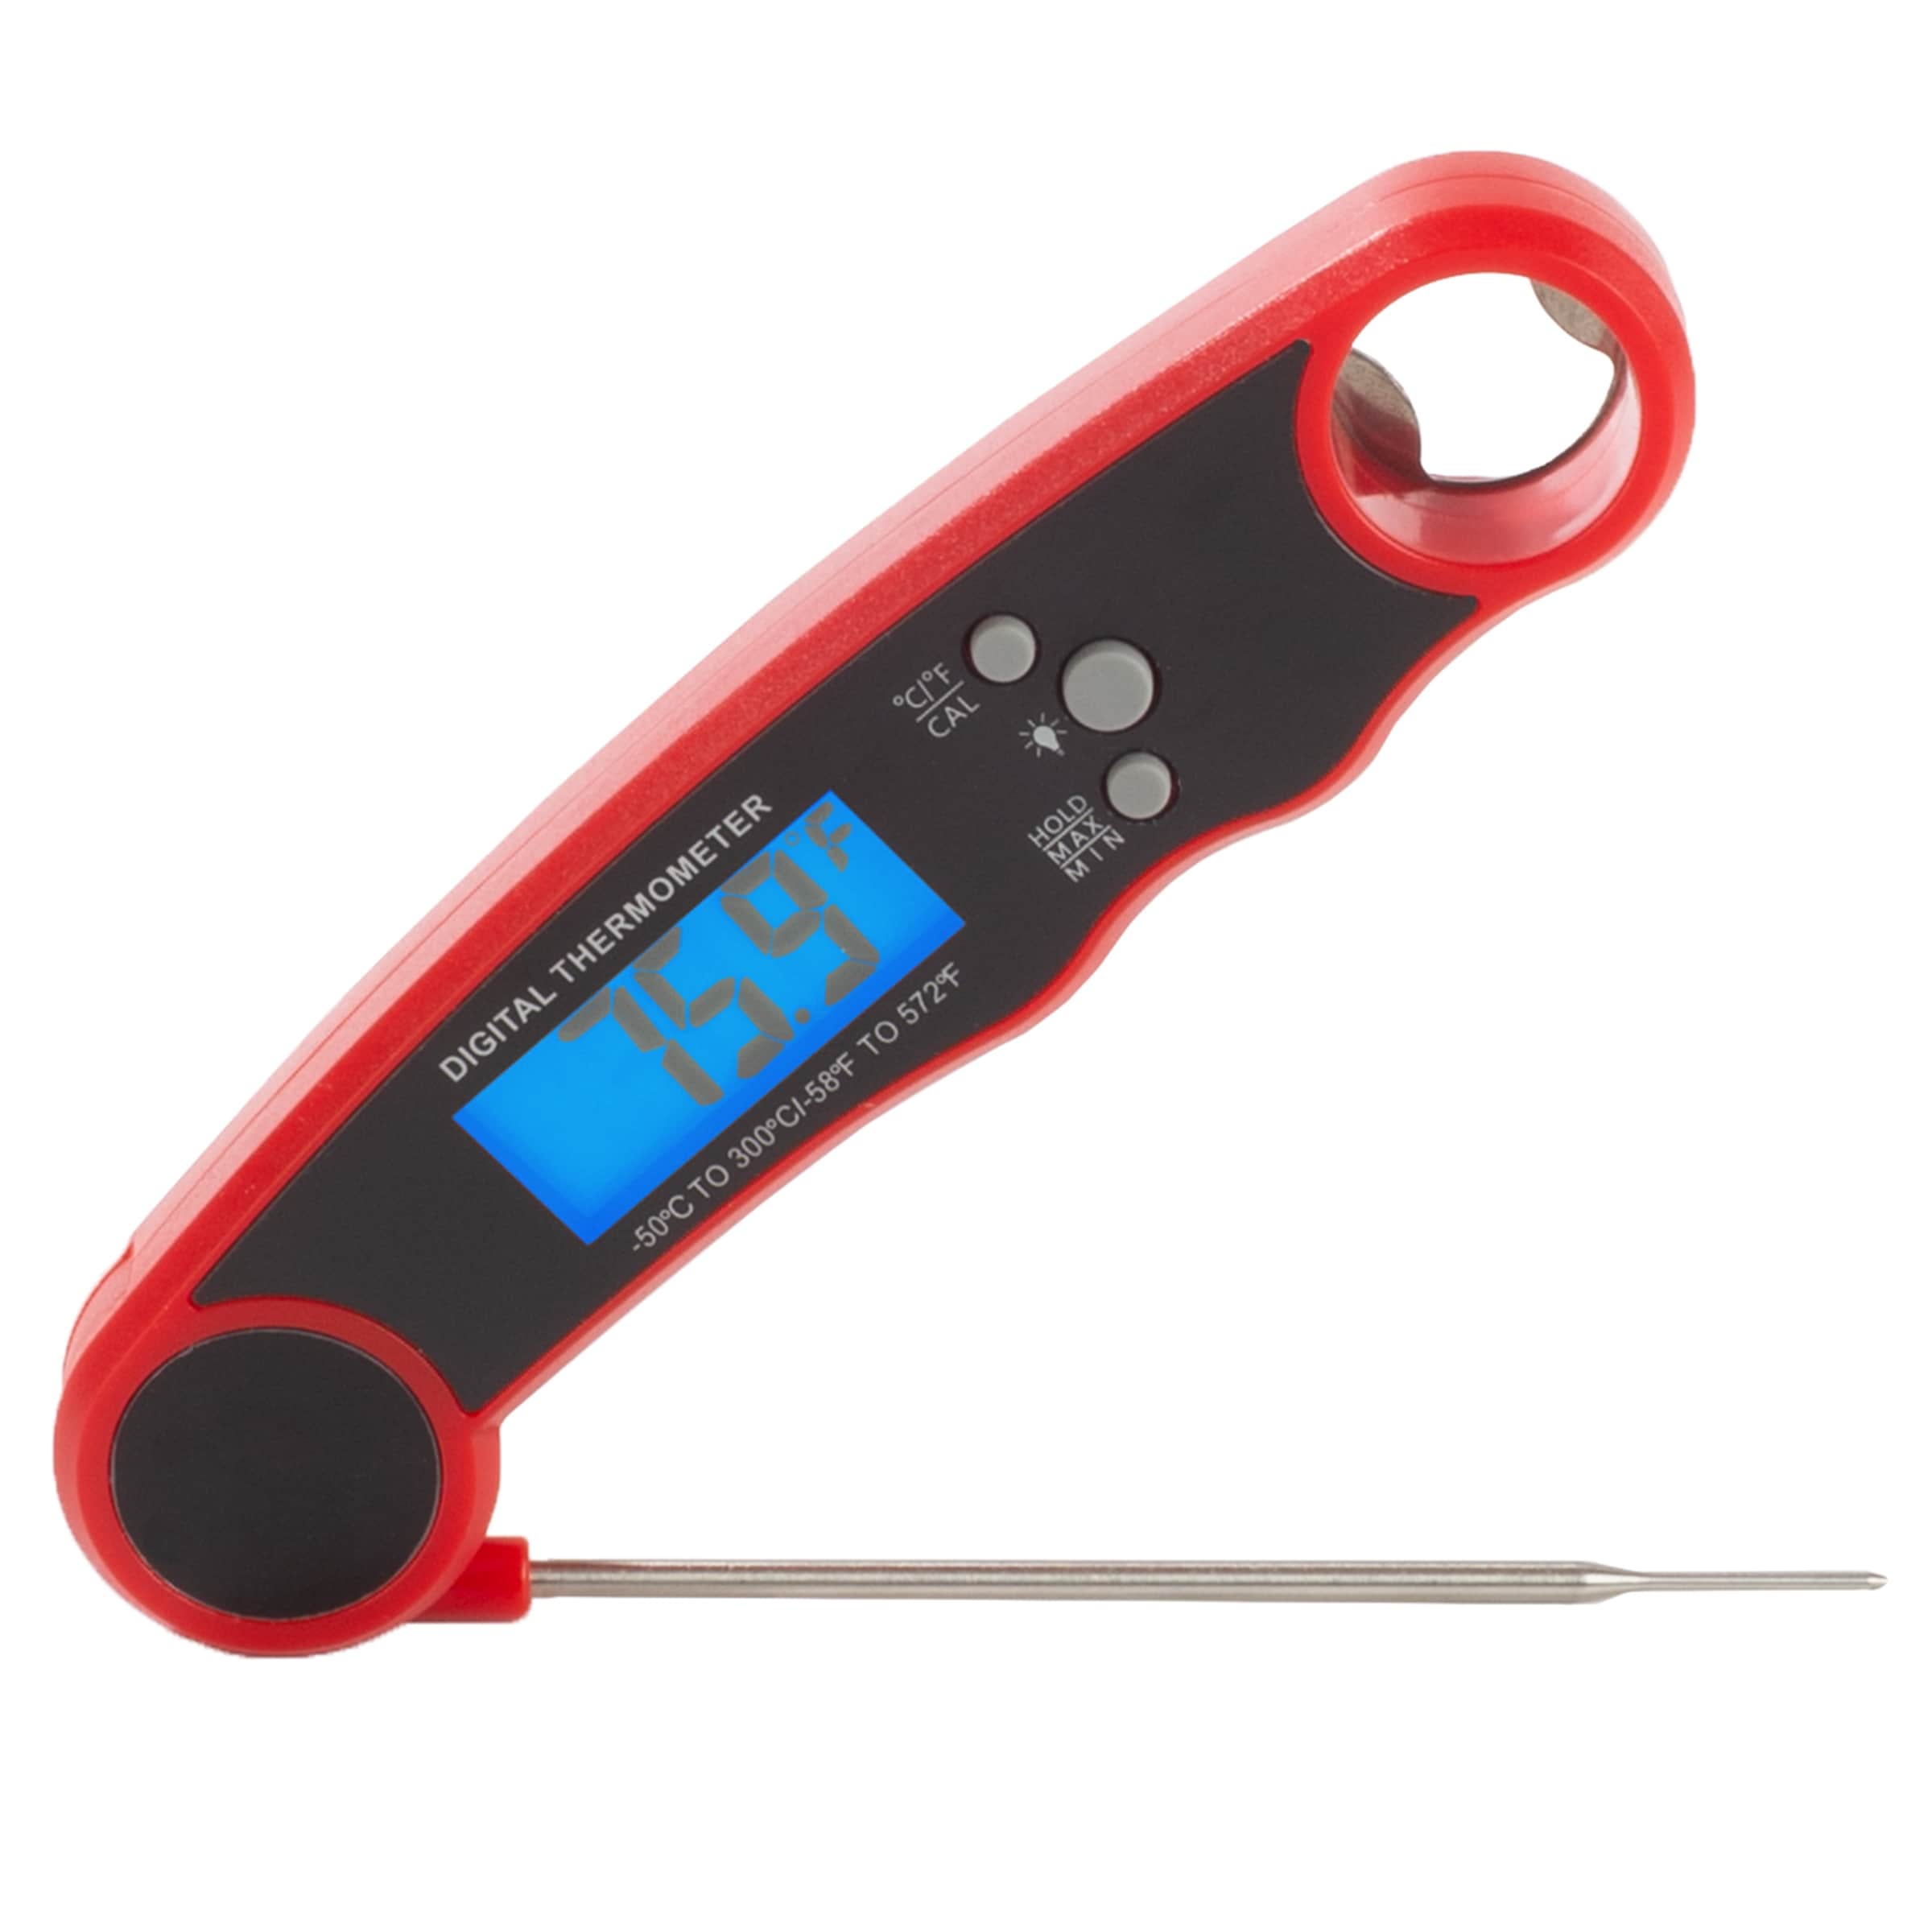 Cheer Collection Wireless Digital Food Thermometer